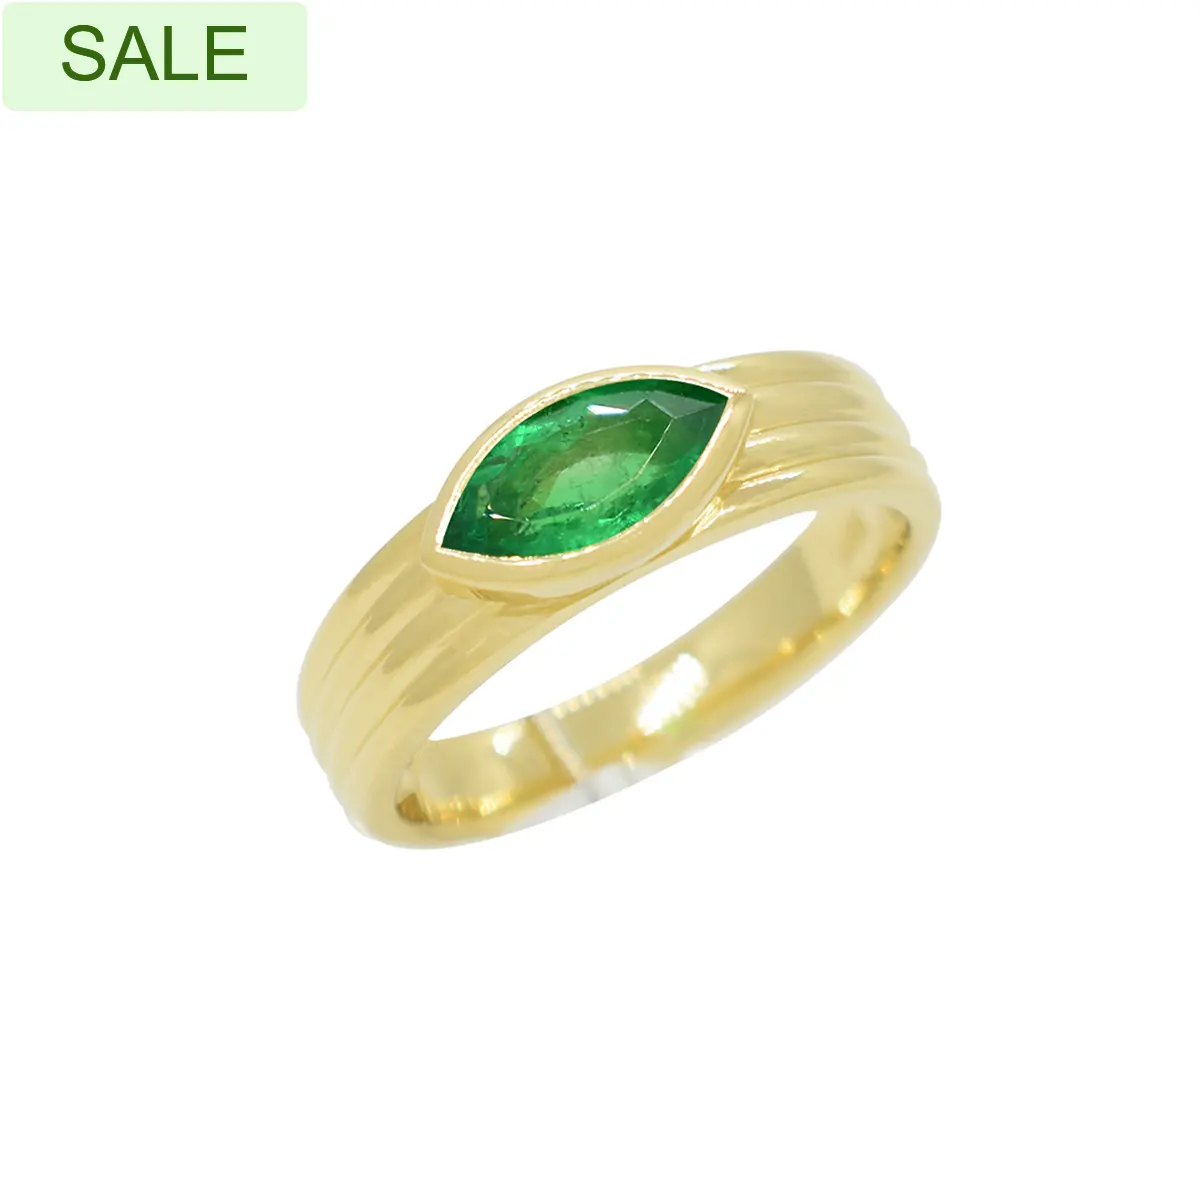 18K Gold Solitaire Emerald Ring with Marquise Shape Natural Emerald